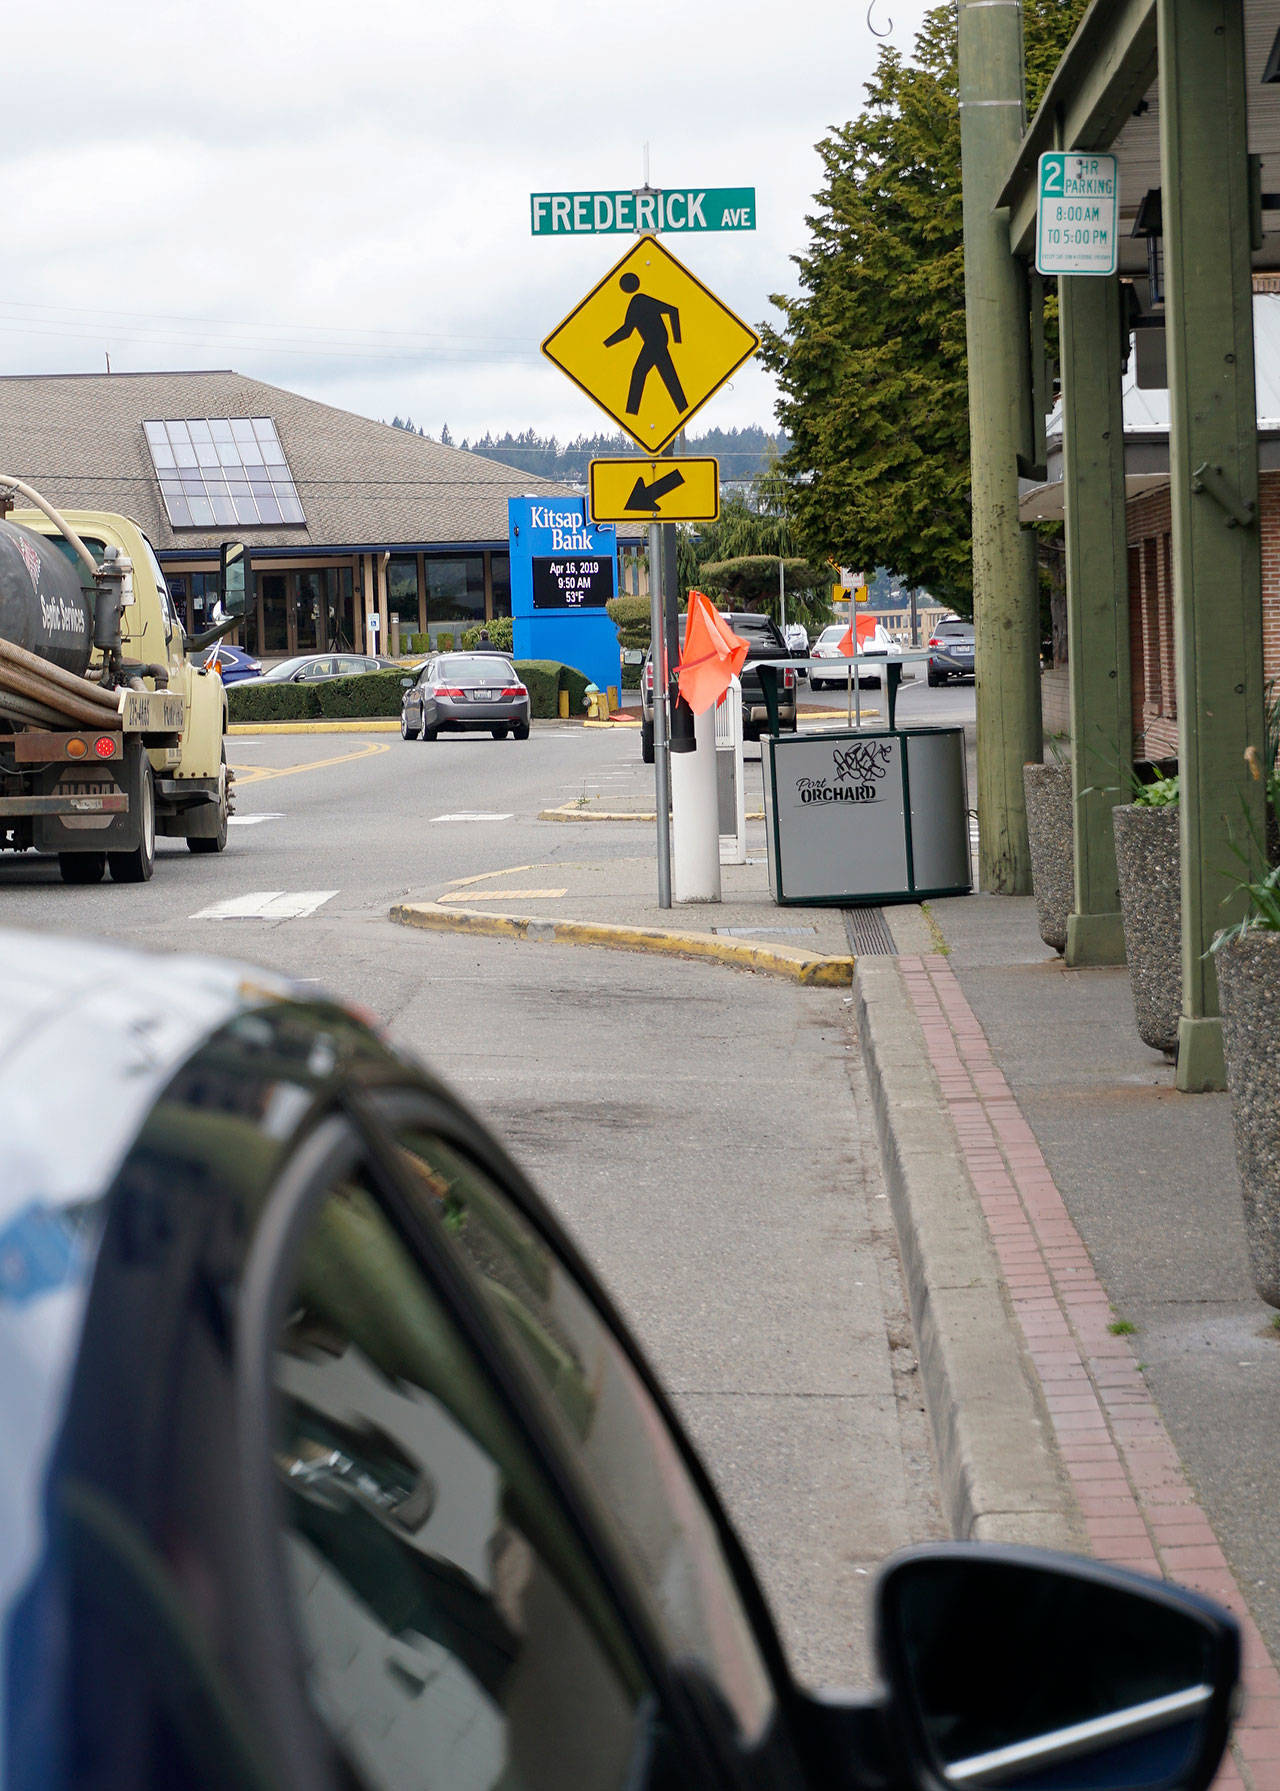 Members of the Port Orchard Bay Street Association have asked the City Council to take another look at changing the time limits drivers can stay in their downtown parking space. (Bob Smith | Kitsap Daily News)